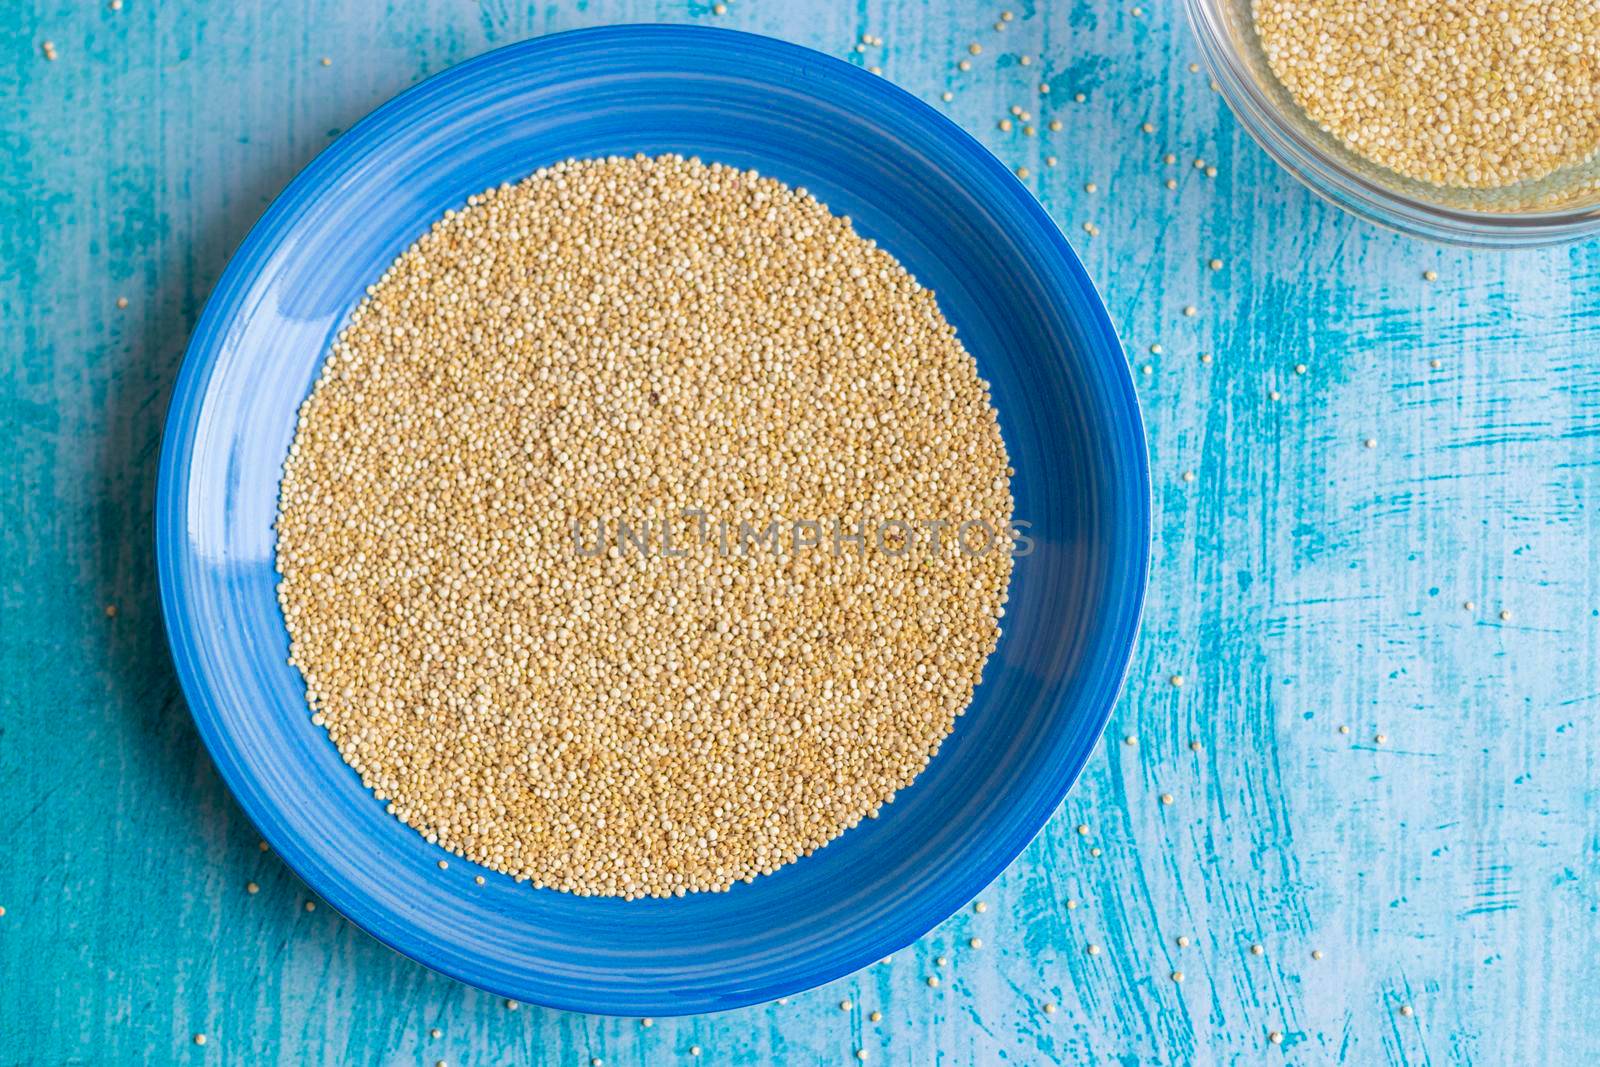 Uncooked quinoa grains inside blue plate by eagg13